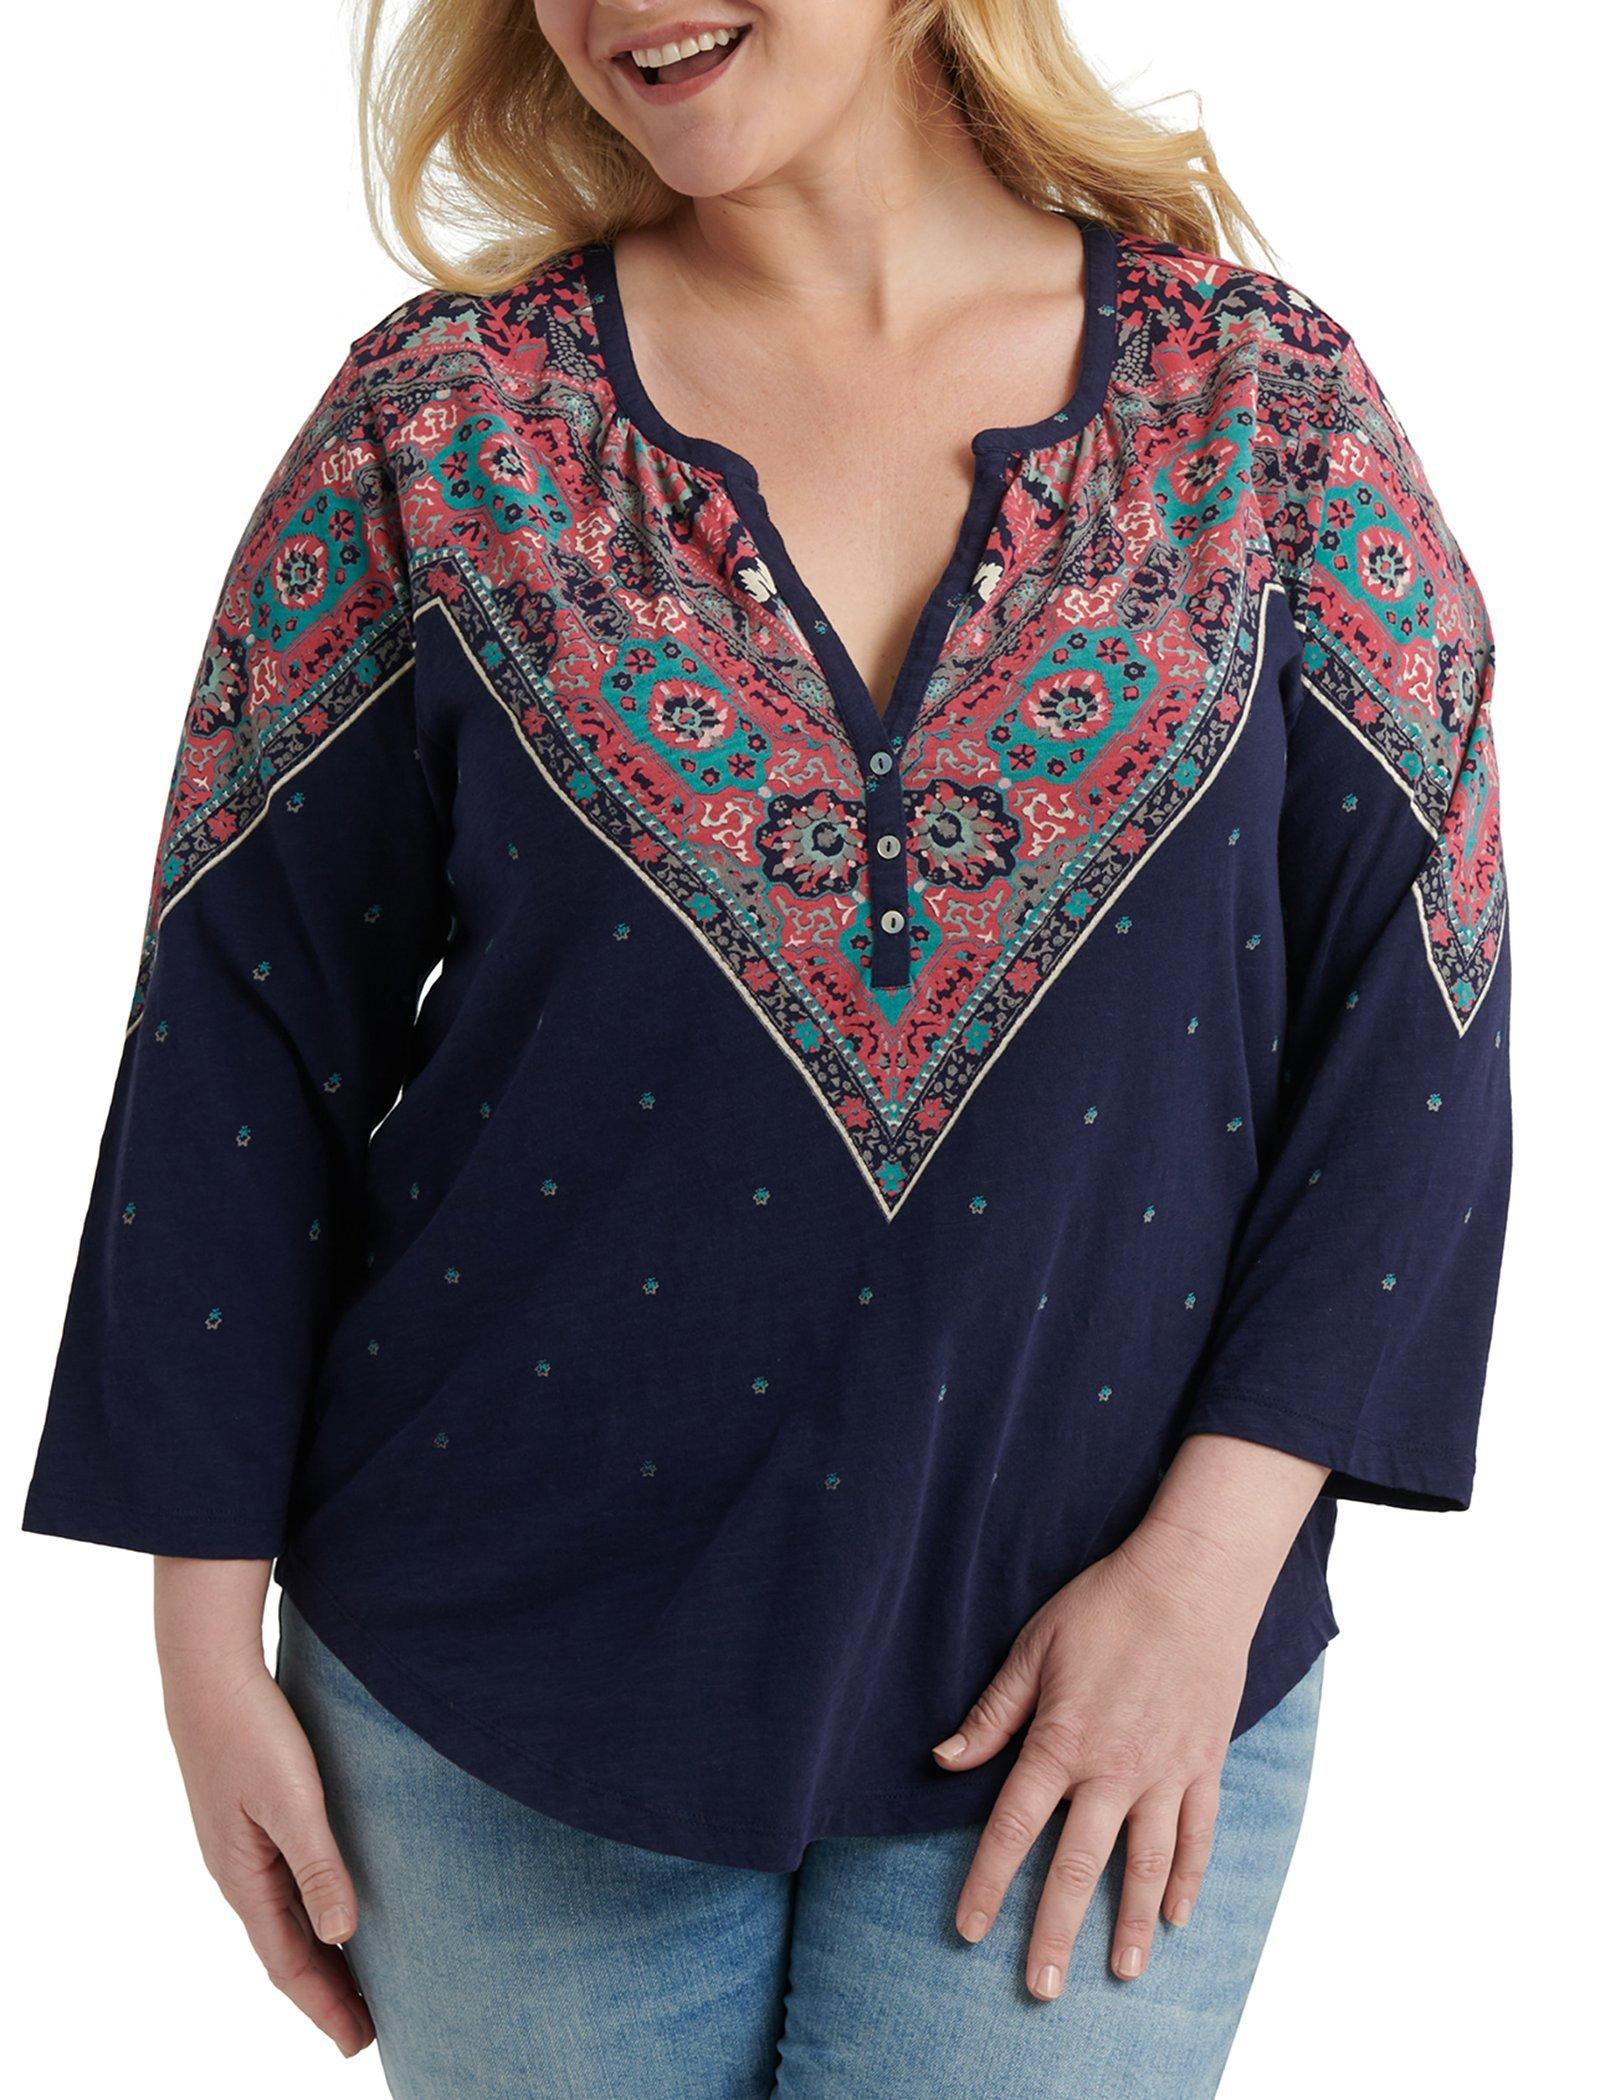 lucky brand plus size tops